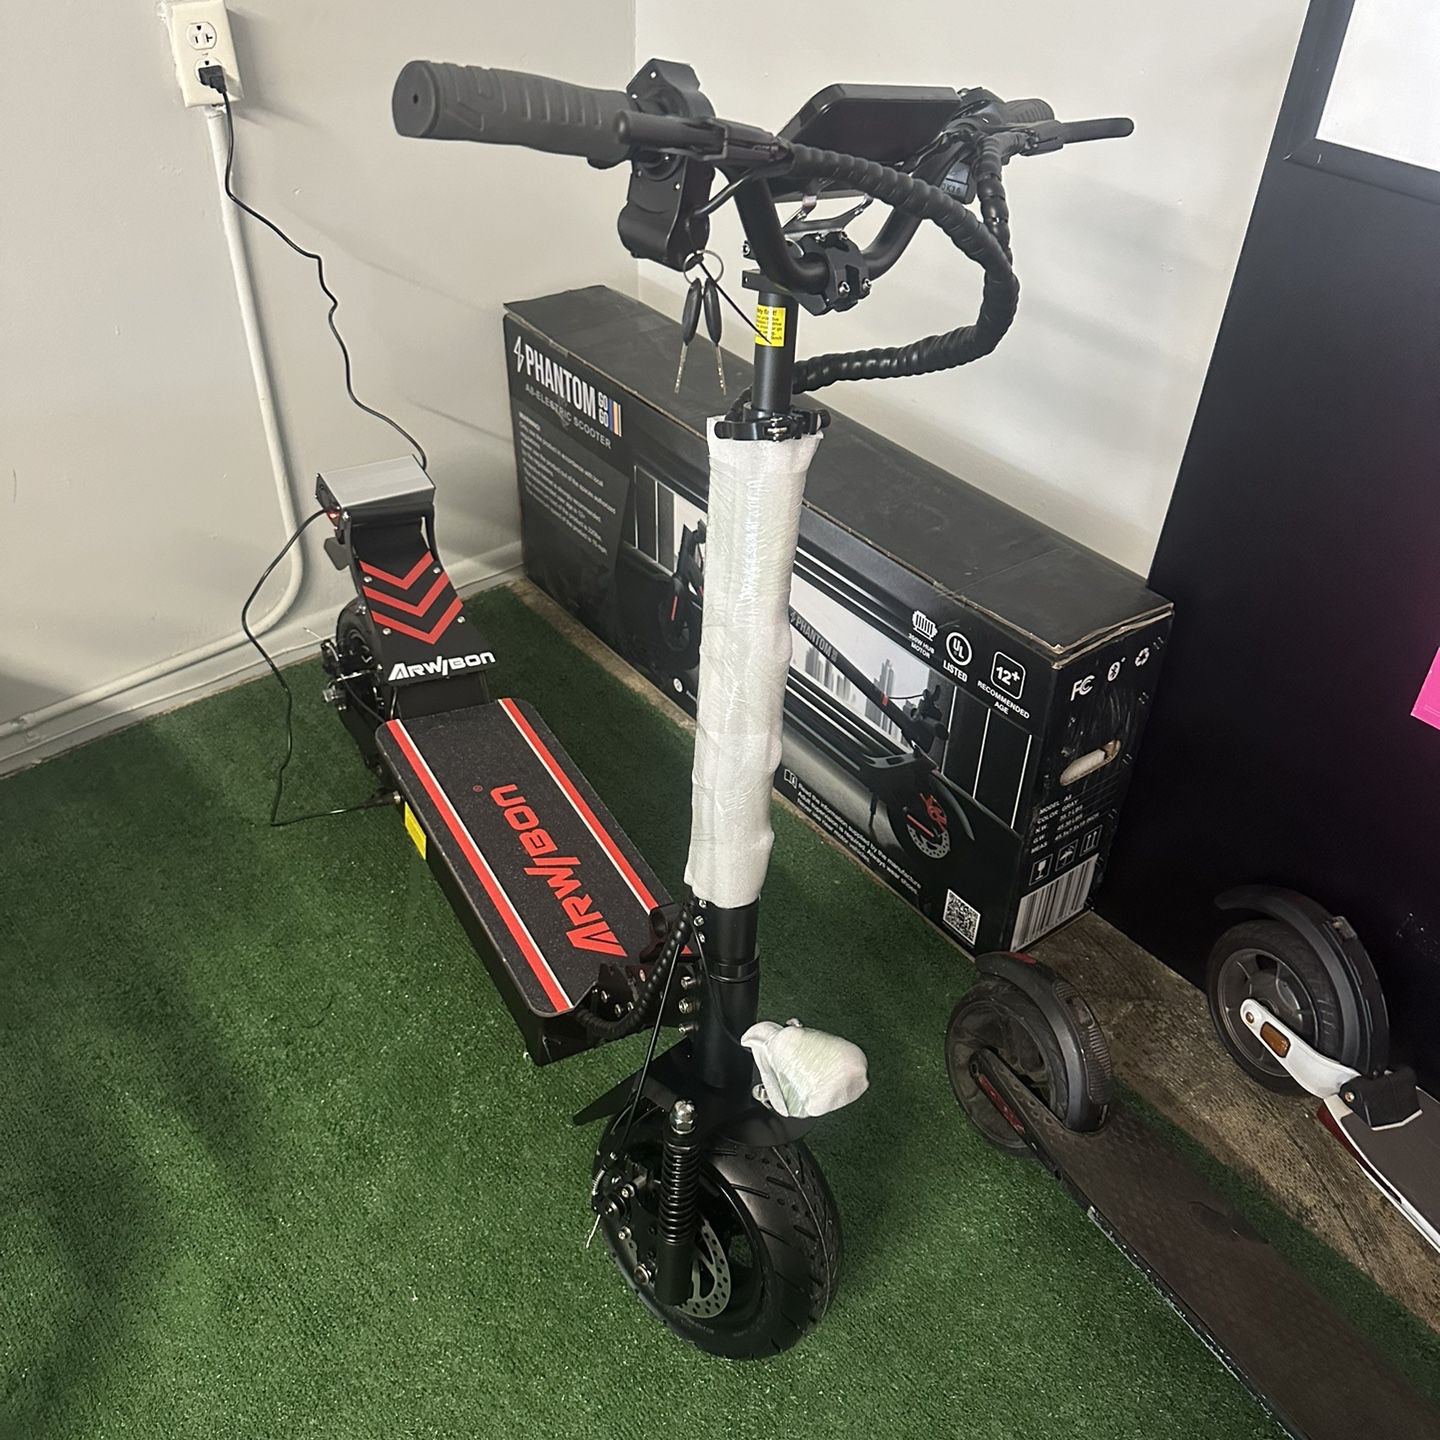 Arwibon Electric Scooter Q30 ****price Is Initial Payment When Finance ***